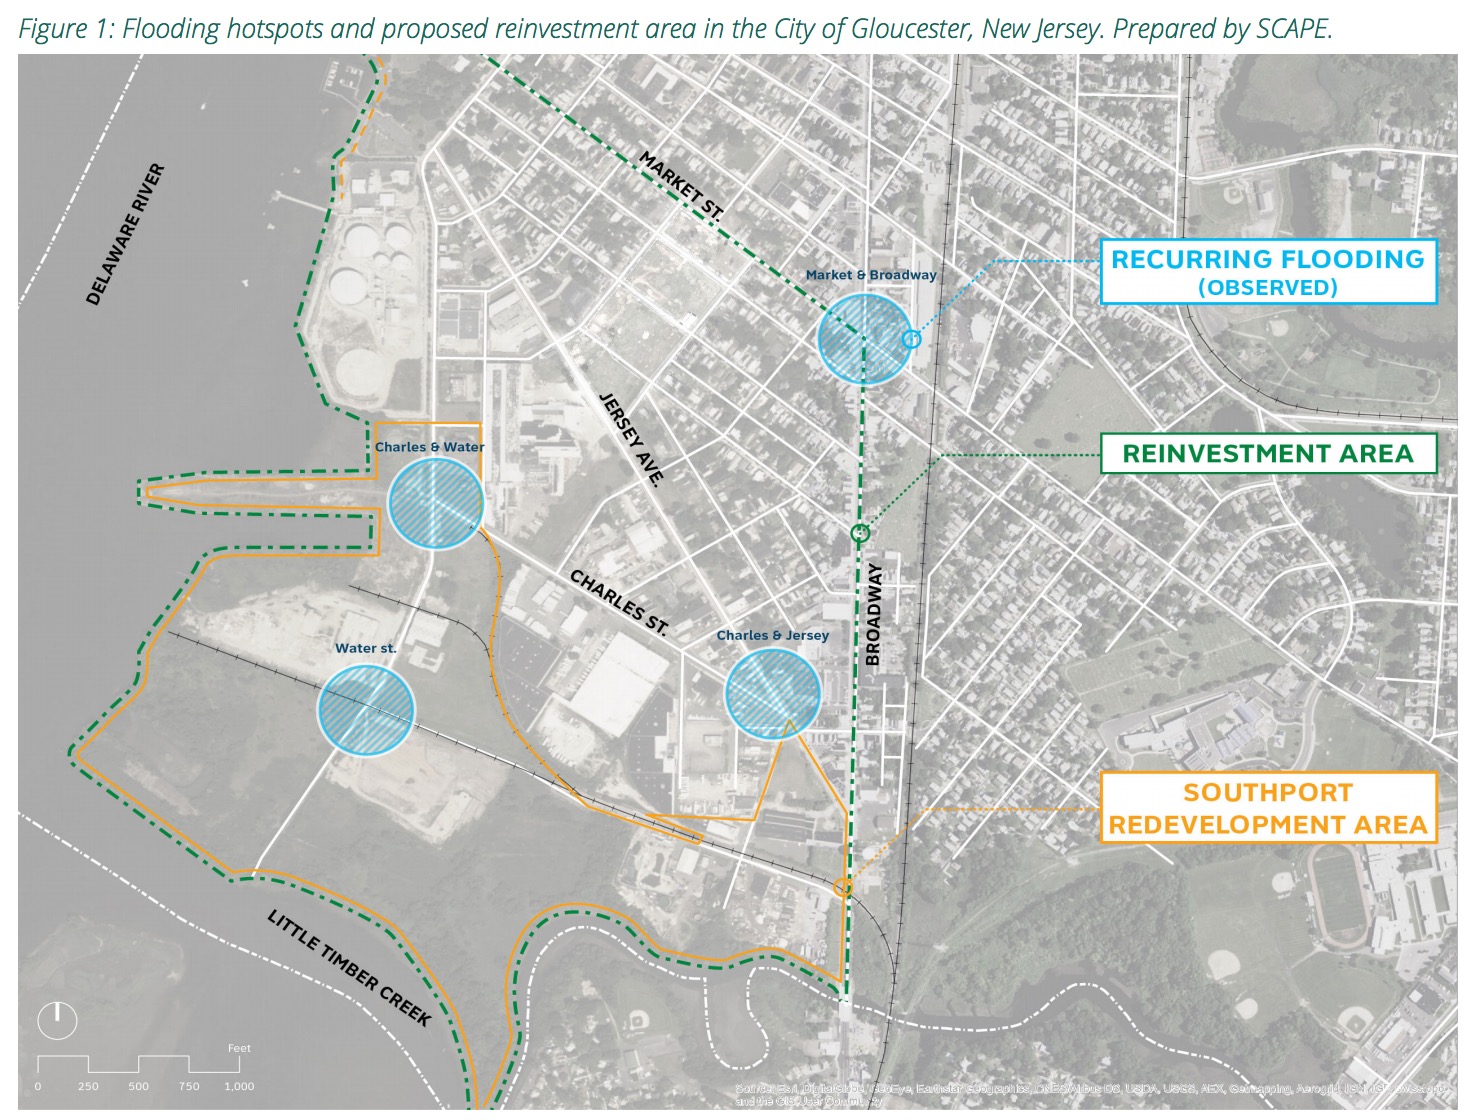 Figure 1: Flooding hotspots and proposed reinvestment area in the City of Gloucester, New Jersey. Prepared by SCAPE.